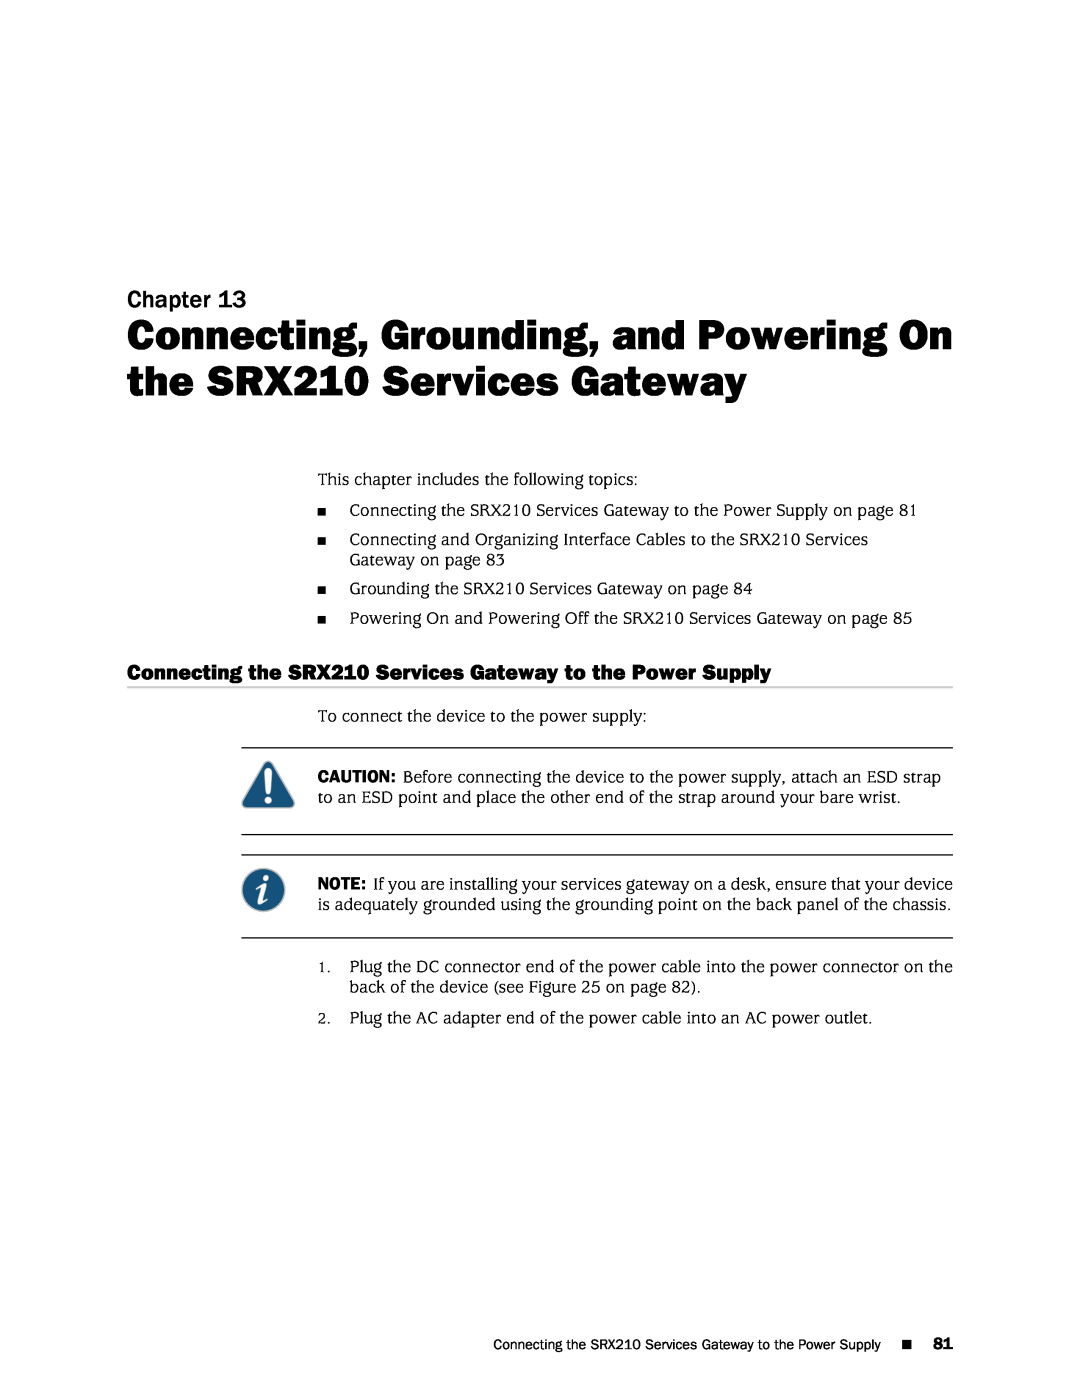 Juniper Networks SRX 210 manual Connecting, Grounding, and Powering On the SRX210 Services Gateway, Chapter 